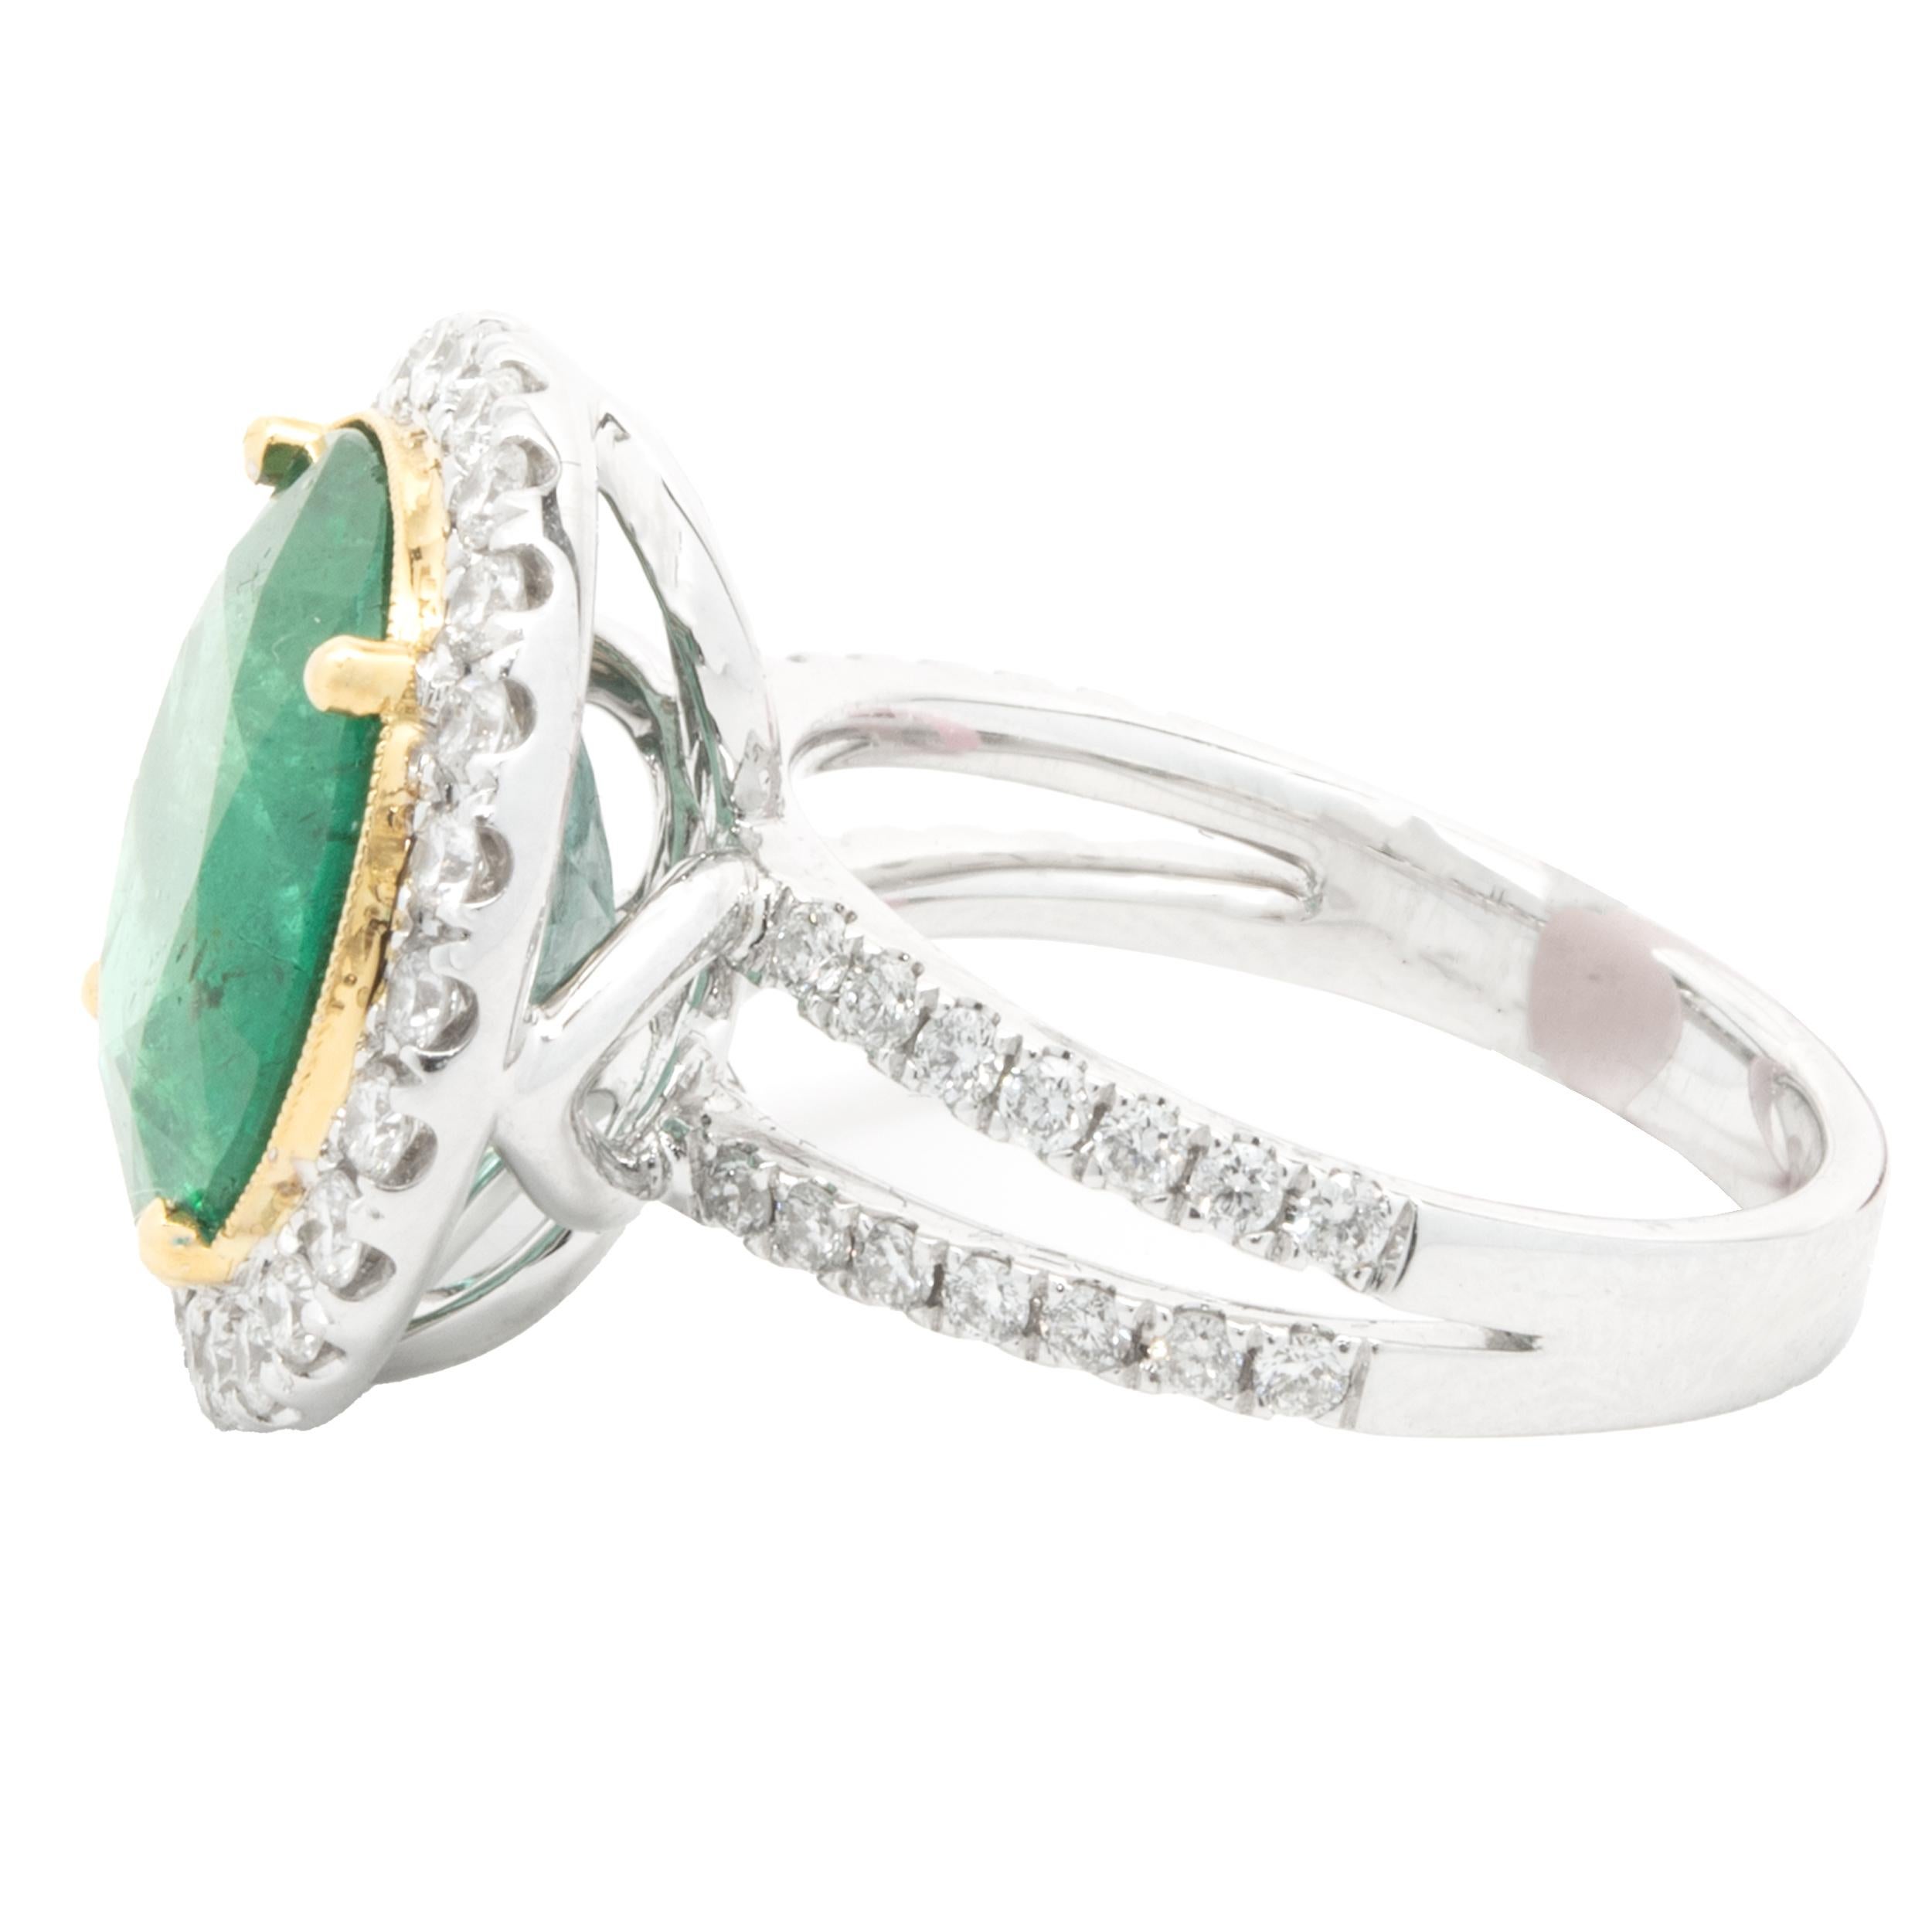 Designer: custom
Material: 18K white and yellow gold
Diamond: 52 round brilliant cut = 0.88cttw
Color: G
Clarity: VS1-2
Emerald: 1 round cut = 7.73ct
Ring Size: 6 (complimentary sizing available)
Weight: 9.06 grams